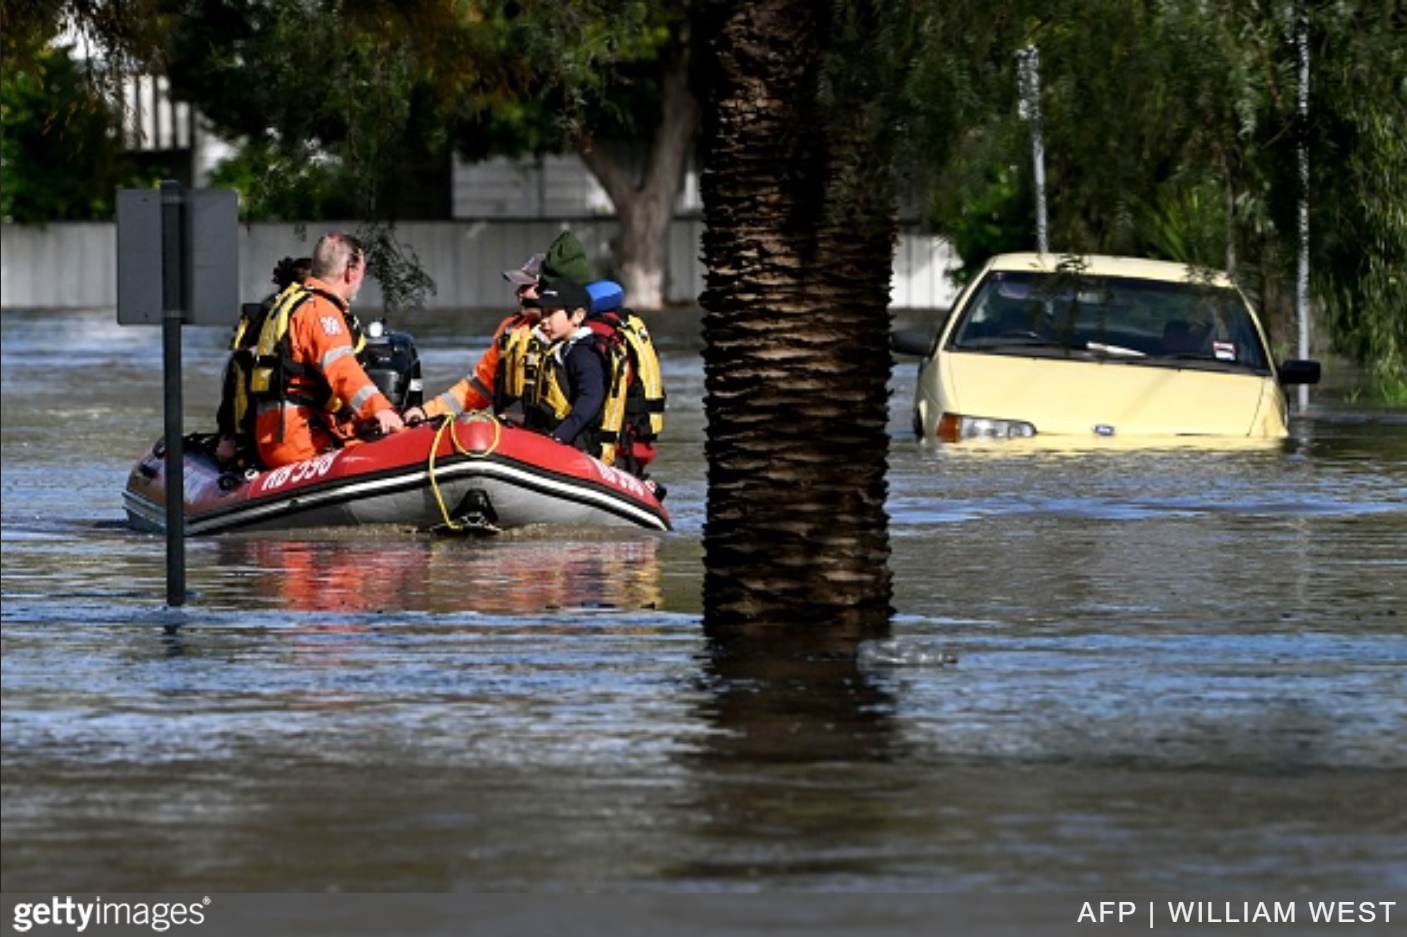 Emergency workers evacuate residents during floods in the Melbourne suburb of Maribyrnong on 14 October 2022. Photo: William West / AFP / Getty Images